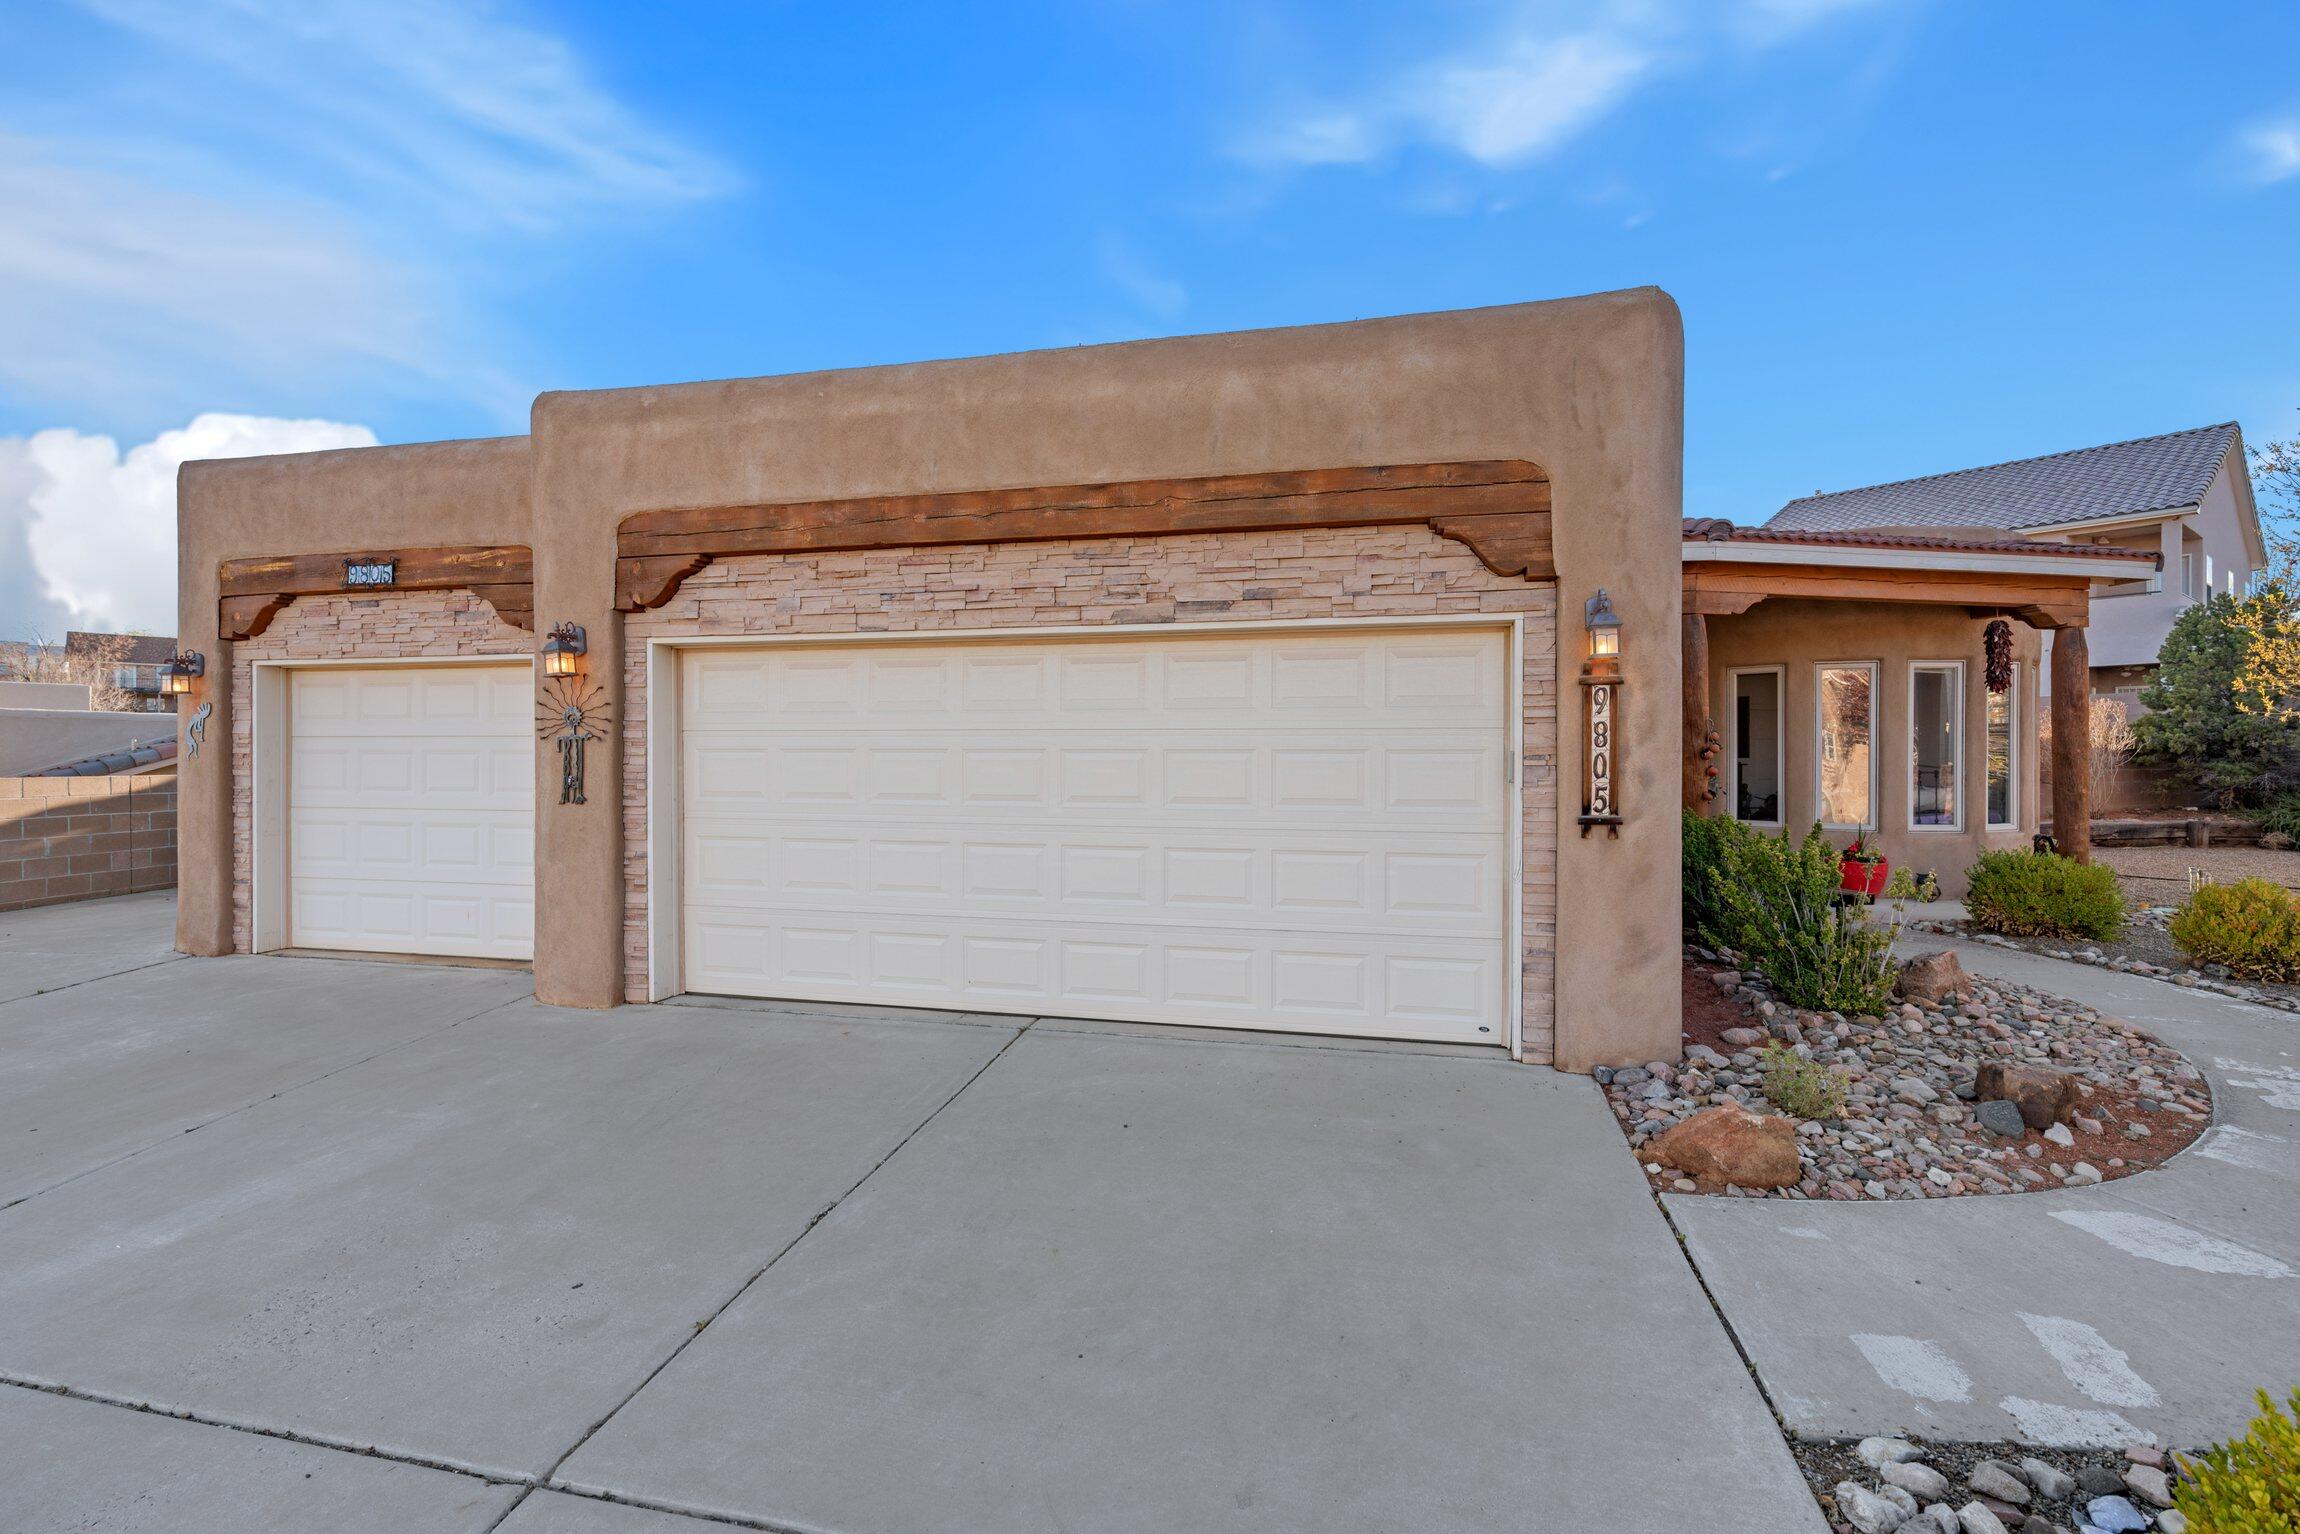 9805 Cody Court NW, Albuquerque, New Mexico 87114, 3 Bedrooms Bedrooms, ,2 BathroomsBathrooms,Residential,For Sale,9805 Cody Court NW,1060012